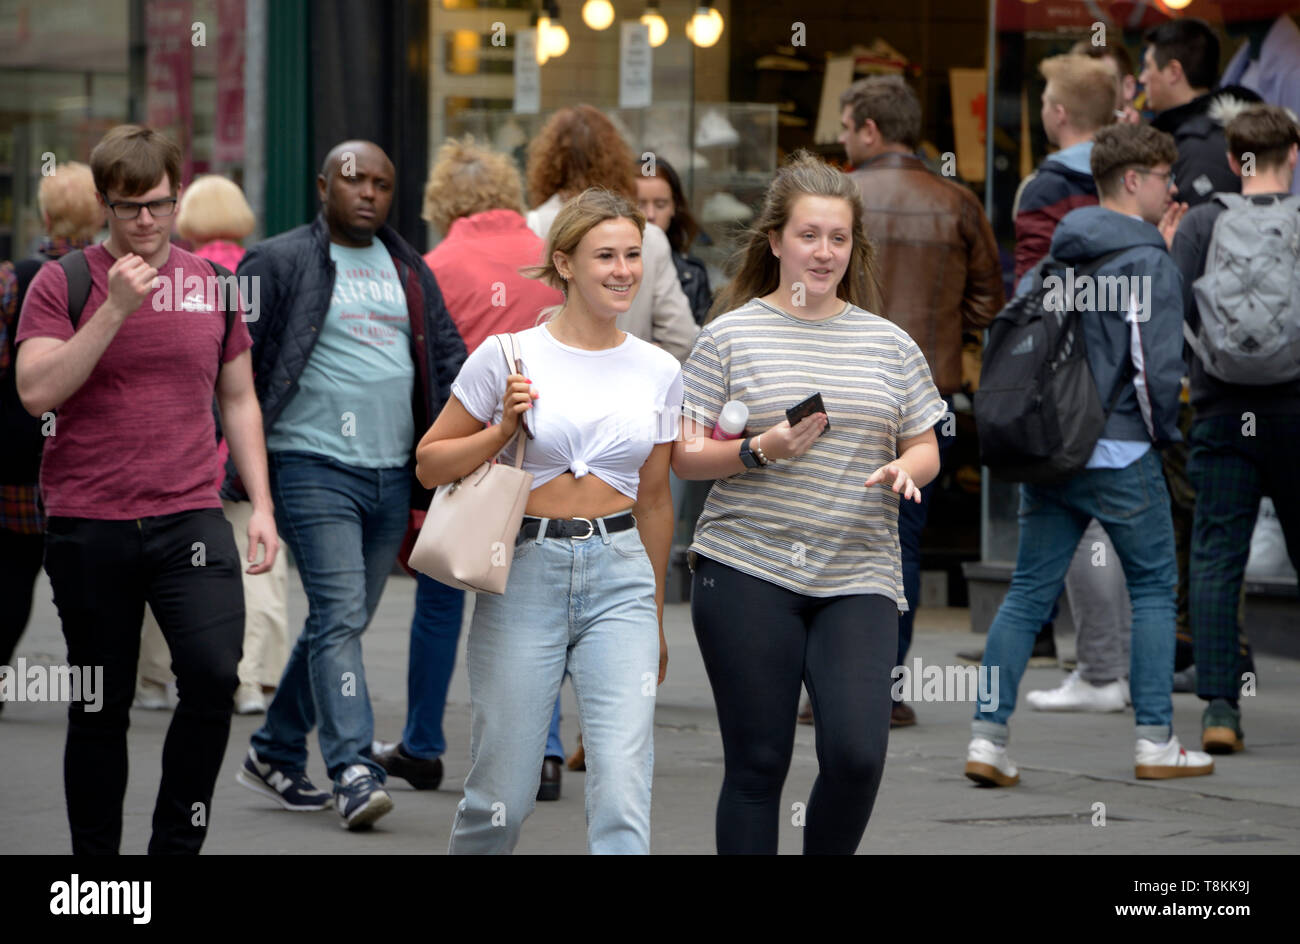 Girls walking in the street, chatting, out shopping. Stock Photo